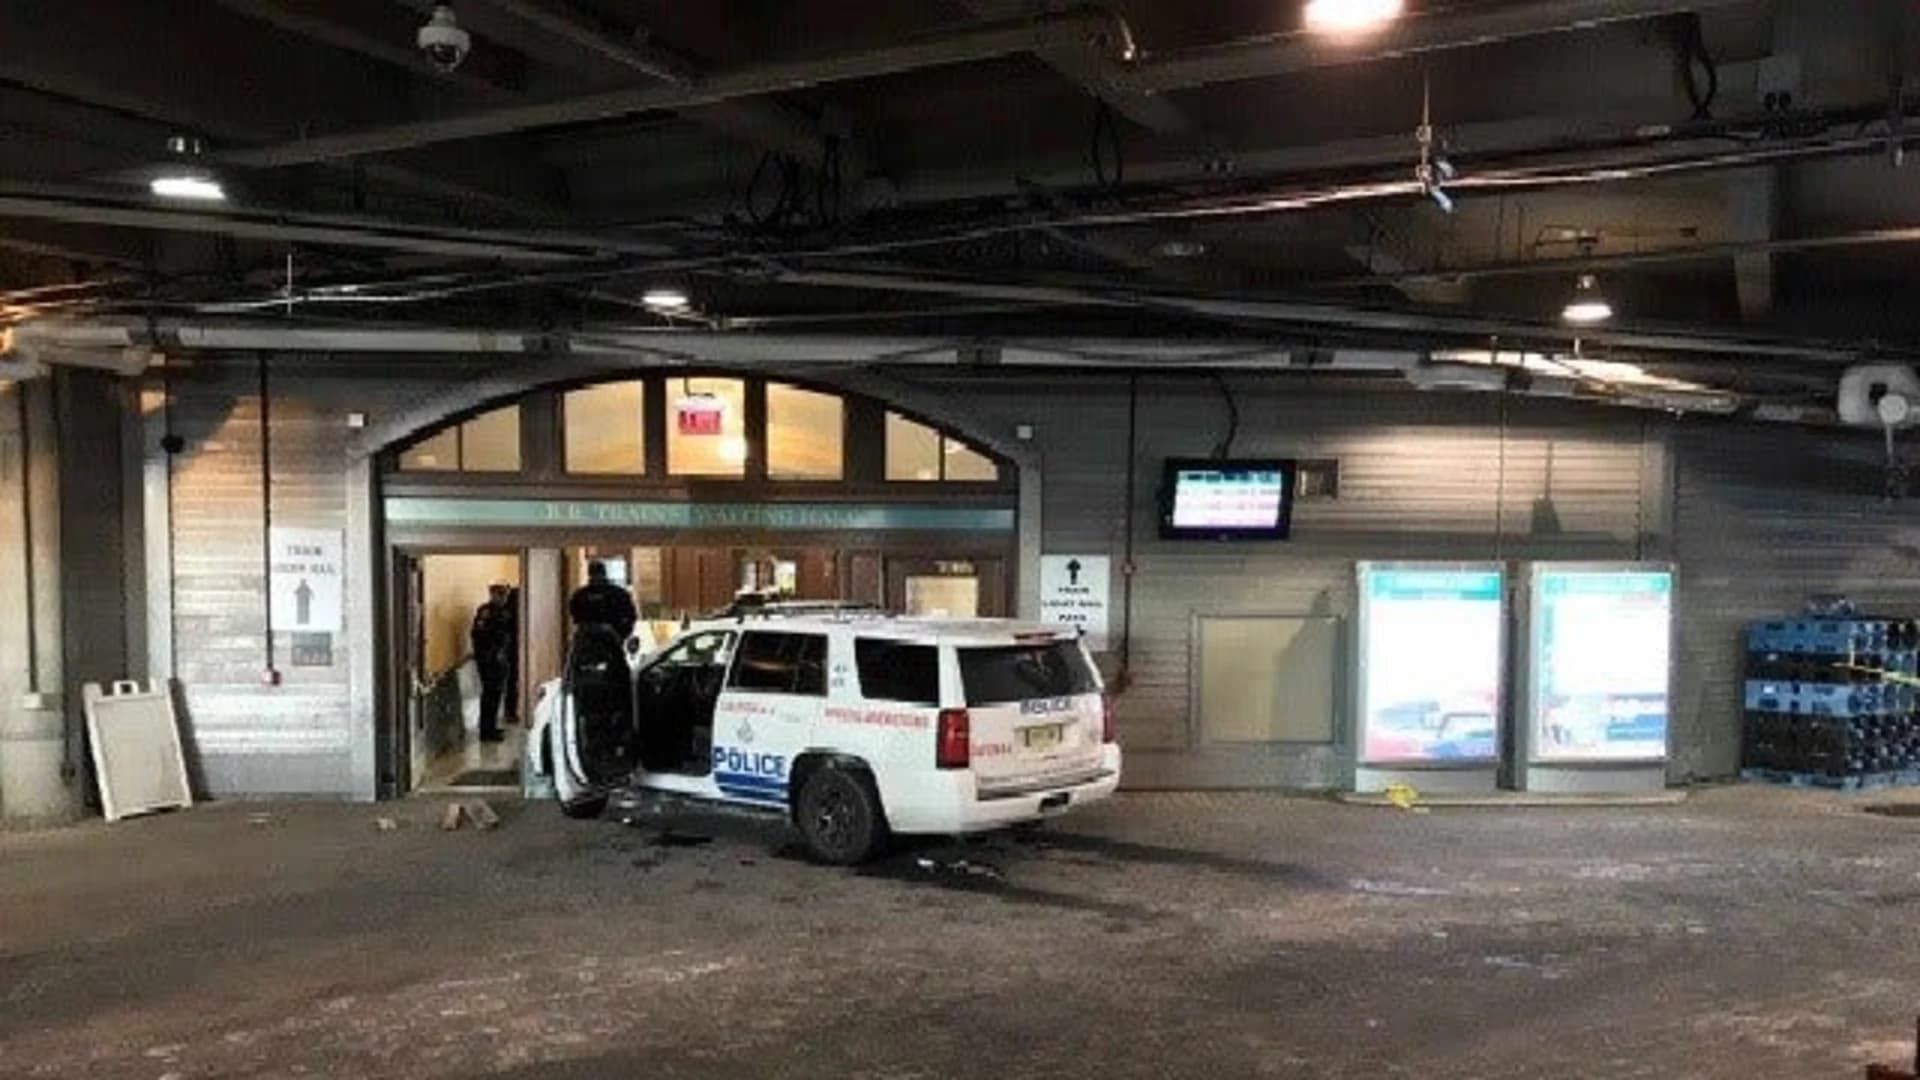 NJ Transit: Man charged for driving SUV into Hoboken Terminal